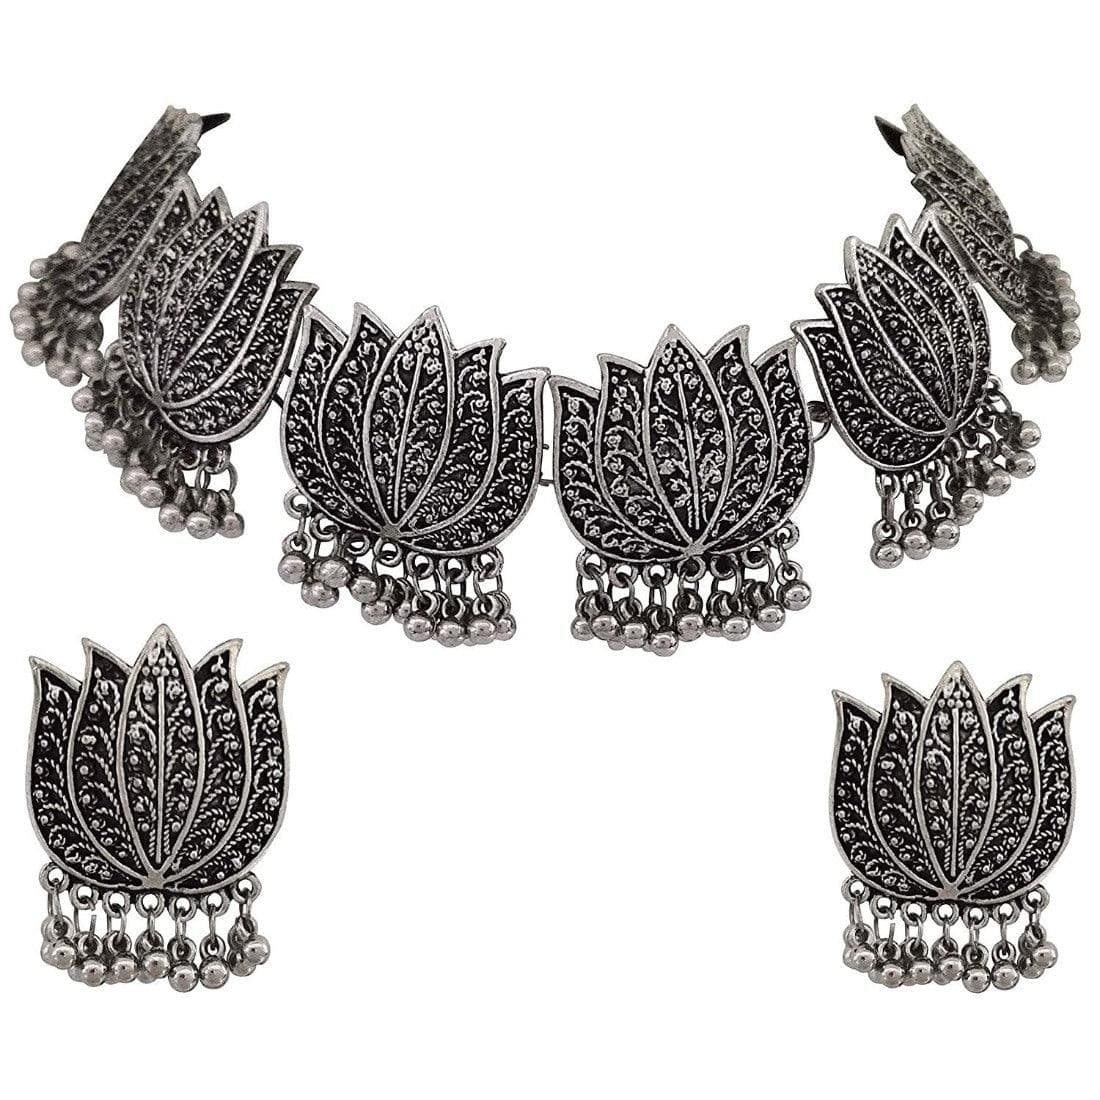 Generic Antique Silver Oxidised Tribal Afghani Necklace With Earrings Set For Women - Fizzibyizzi